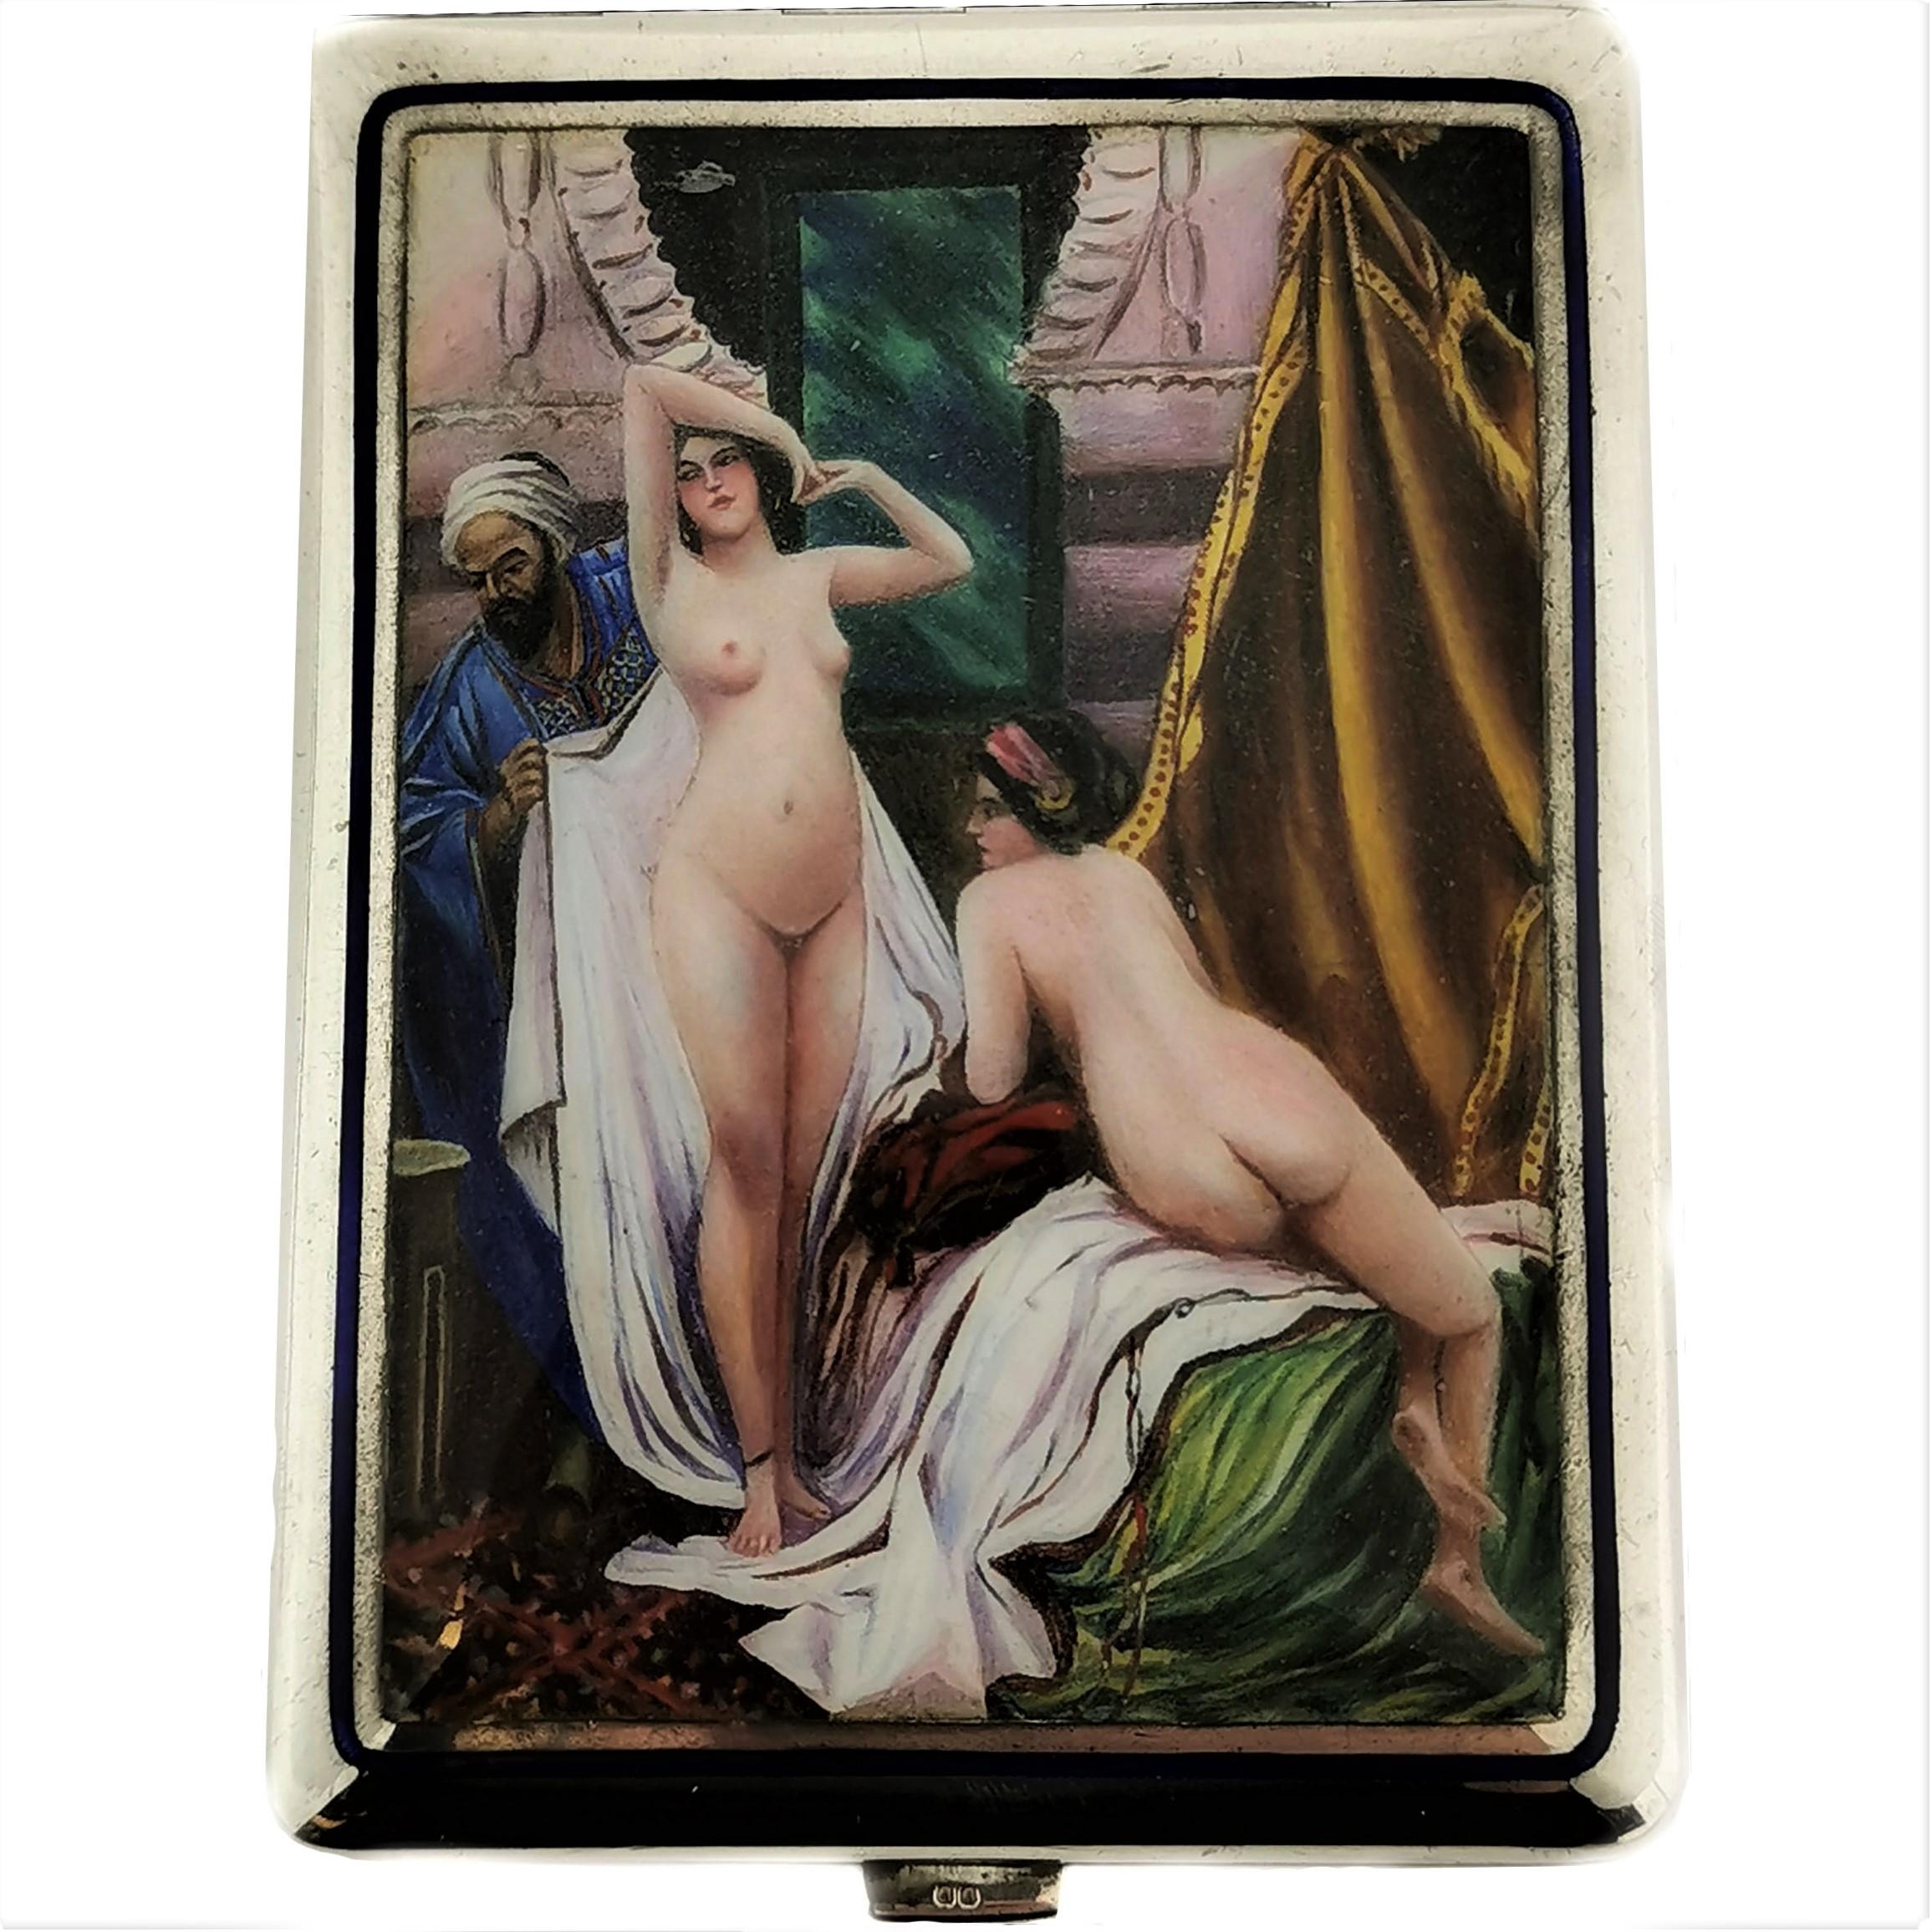 A magnificent Antique Silver Cigarette Case featuring a detailed enamel scene on the front cover rendered in rich colour and vivid detail. The scene shows two nude women lounging on luxurious fabrics as a man hands them a towel. The back of the Case